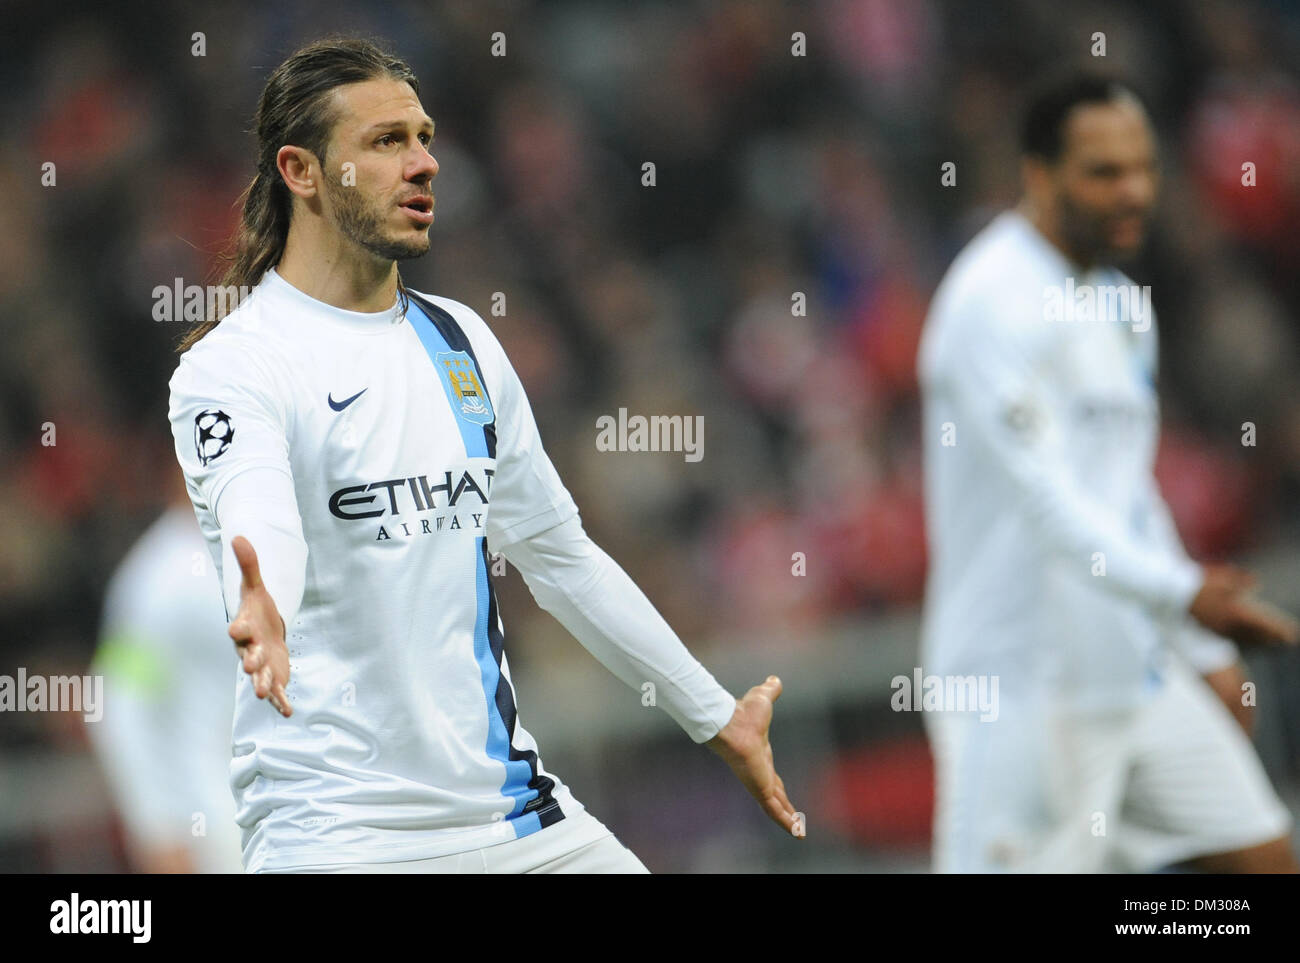 Munich, Germany. 10th Dec, 2013. Manchester's Martin Demichelis during the Champions League match between FC Bayern Munich and Manchester City at Allianz Arena in Munich, Germany, 10 December 2013. The match ended 2-3 for Manchester City. Photo: Andreas Gebert/dpa/Alamy Live News Stock Photo